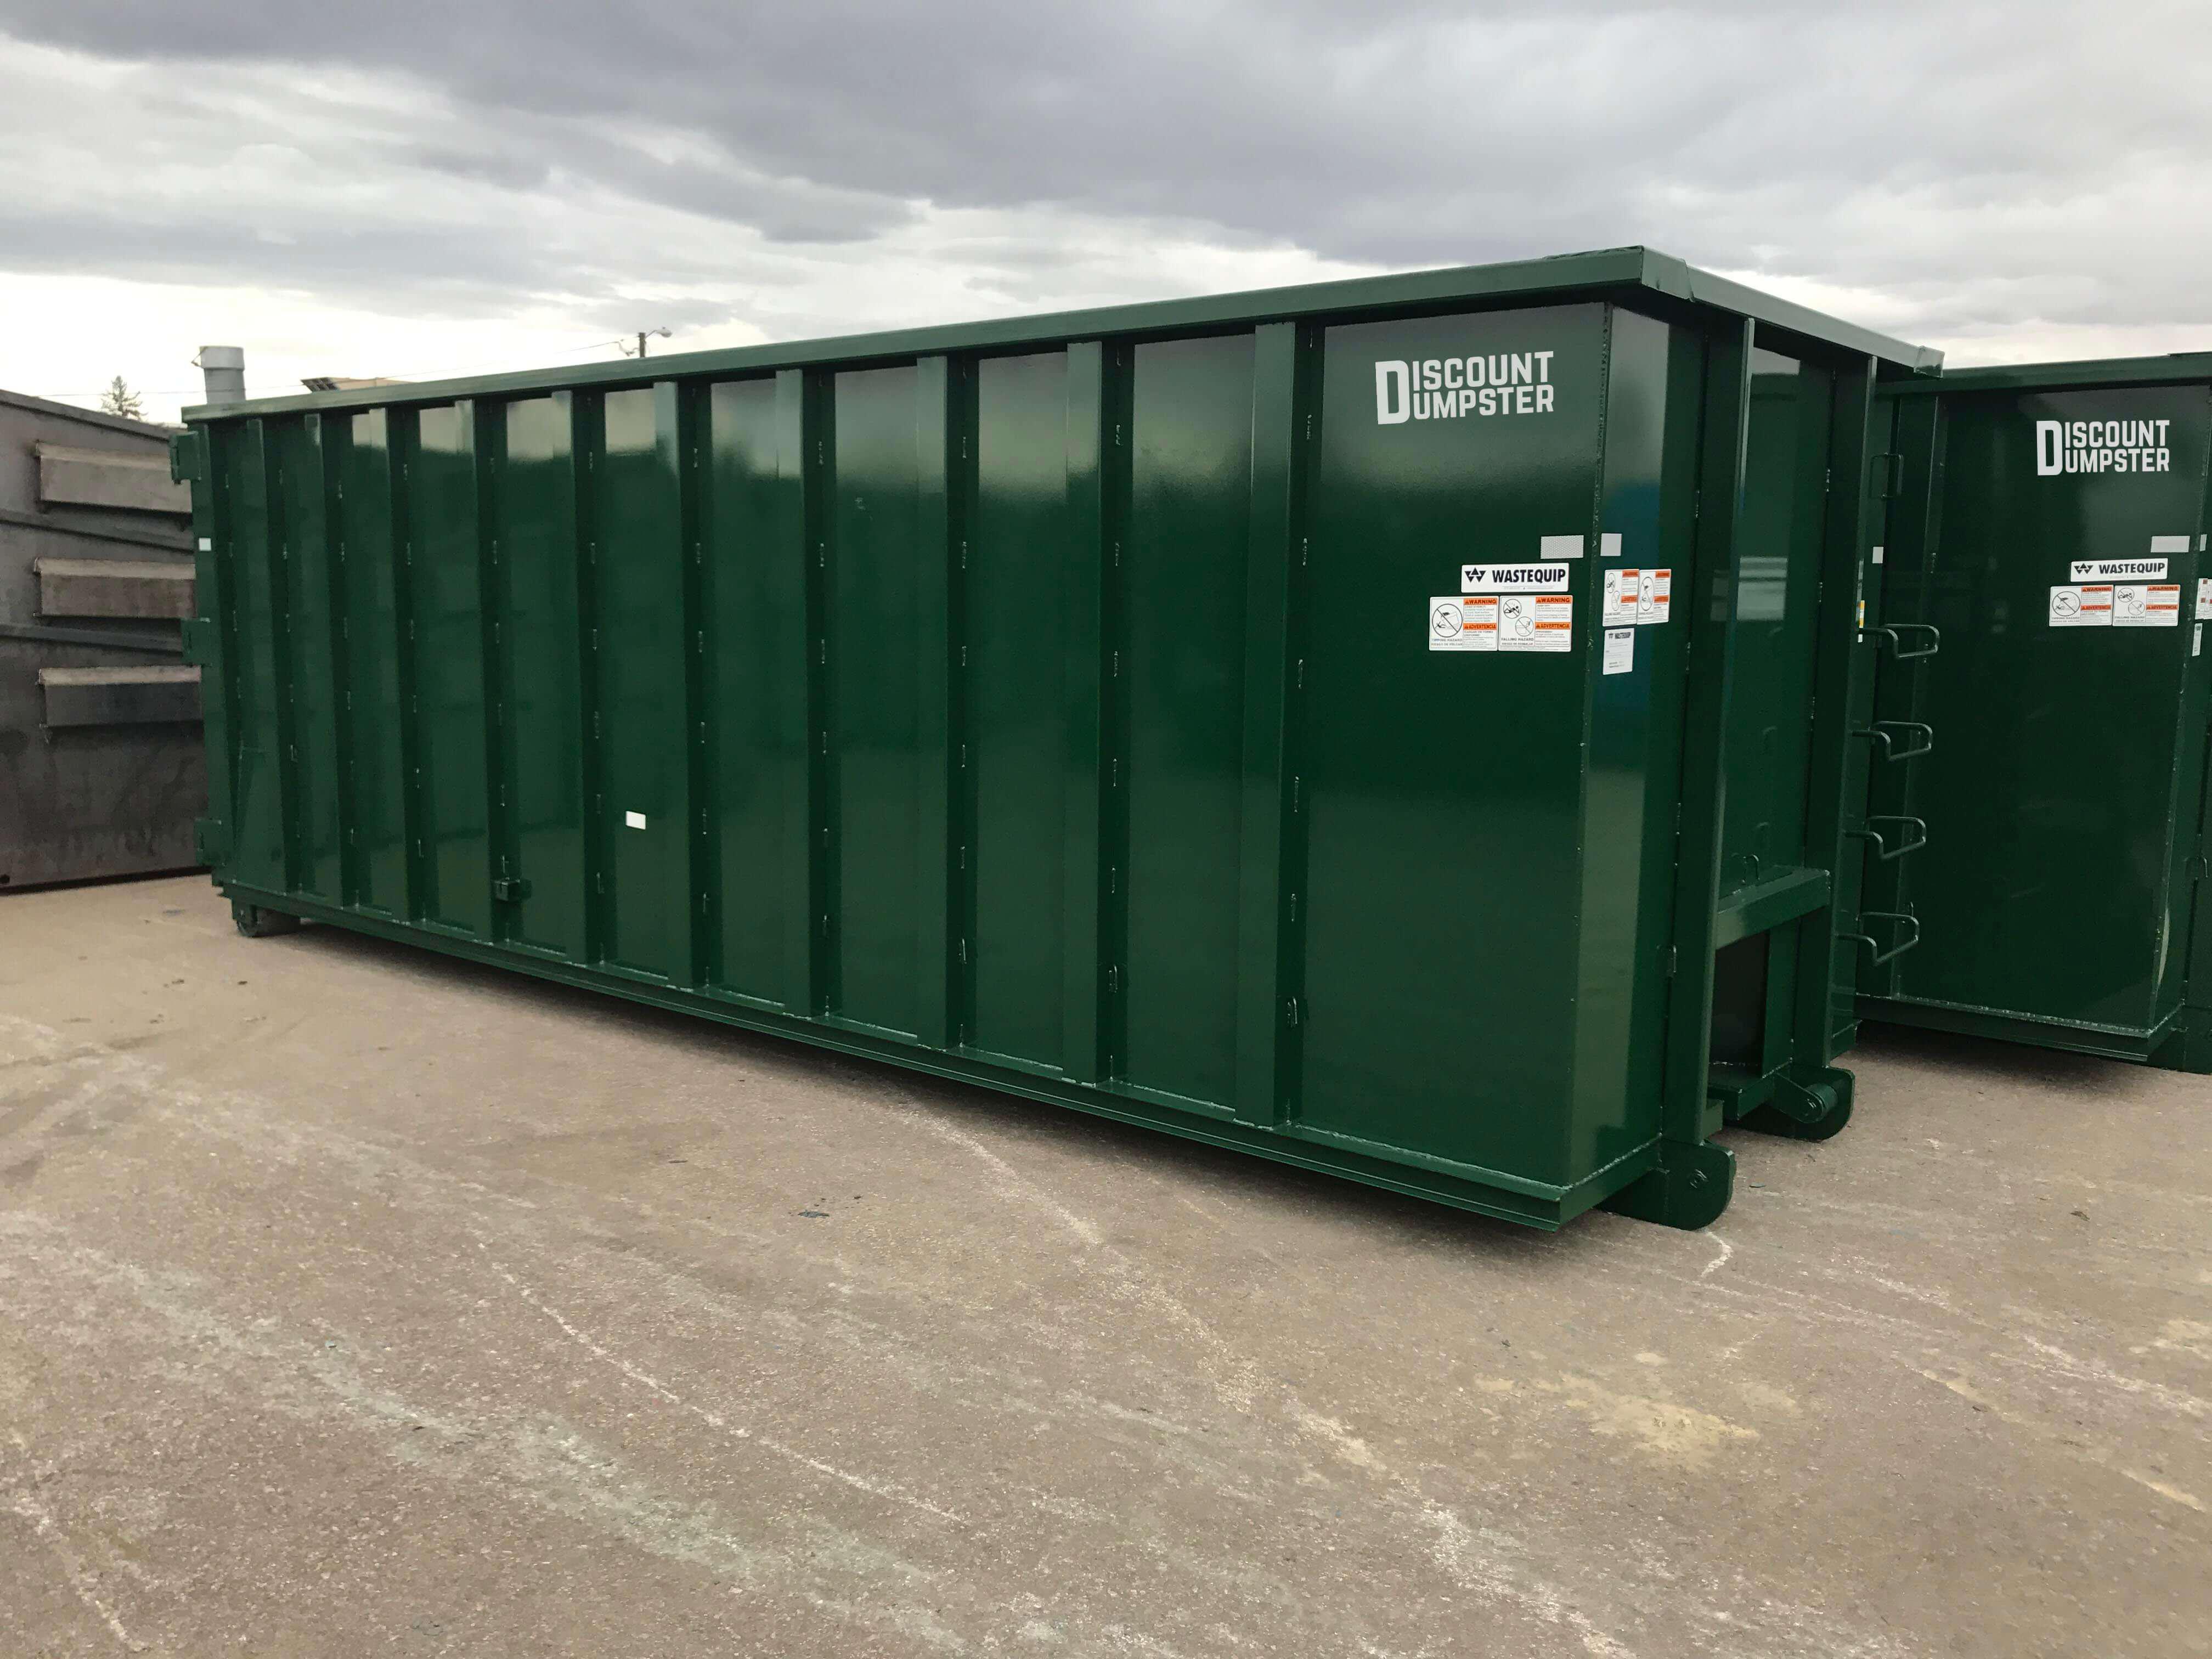 Discount dumpster has roll off dumpsters for Denver co